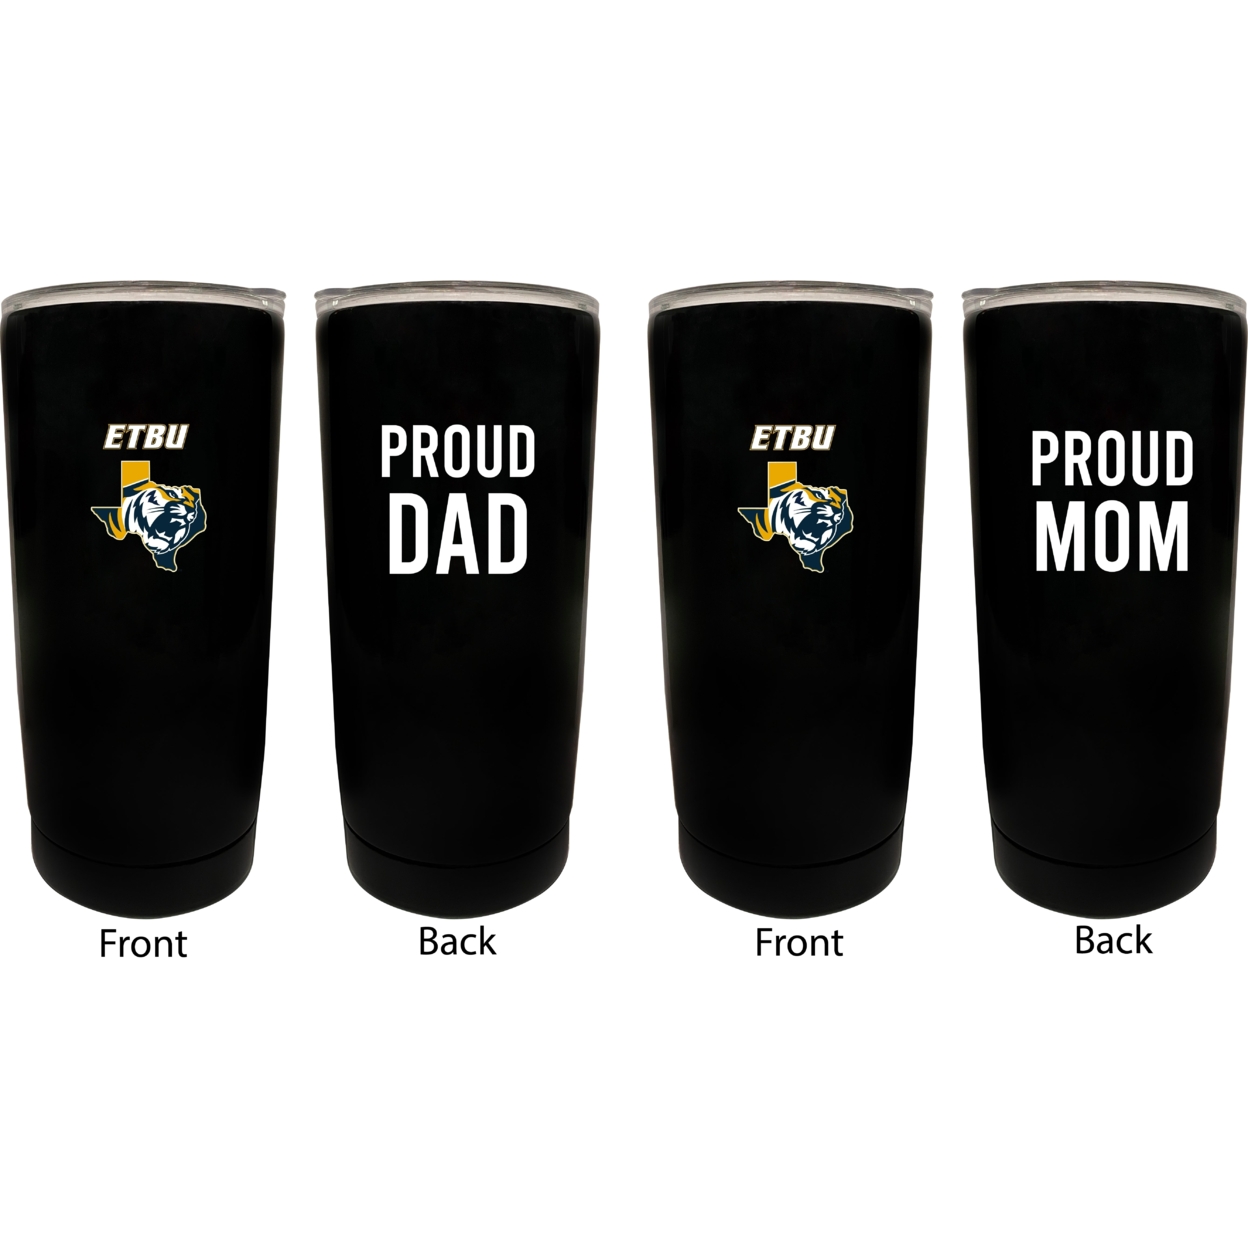 East Texas Baptist University Proud Mom And Dad 16 Oz Insulated Stainless Steel Tumblers 2 Pack Black.